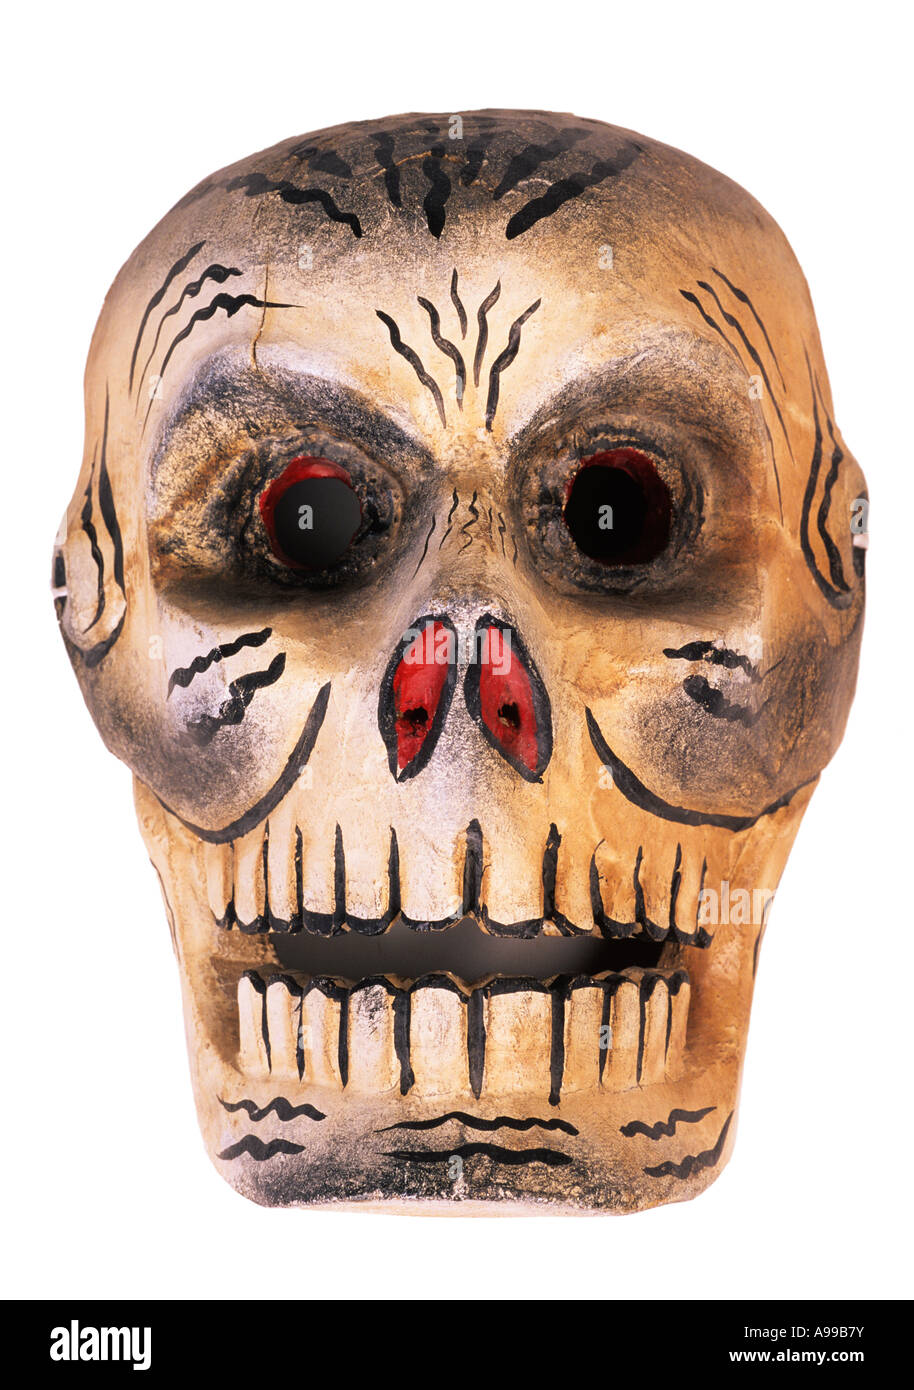 Mexican Day of the Dead skull mask Stock Photo